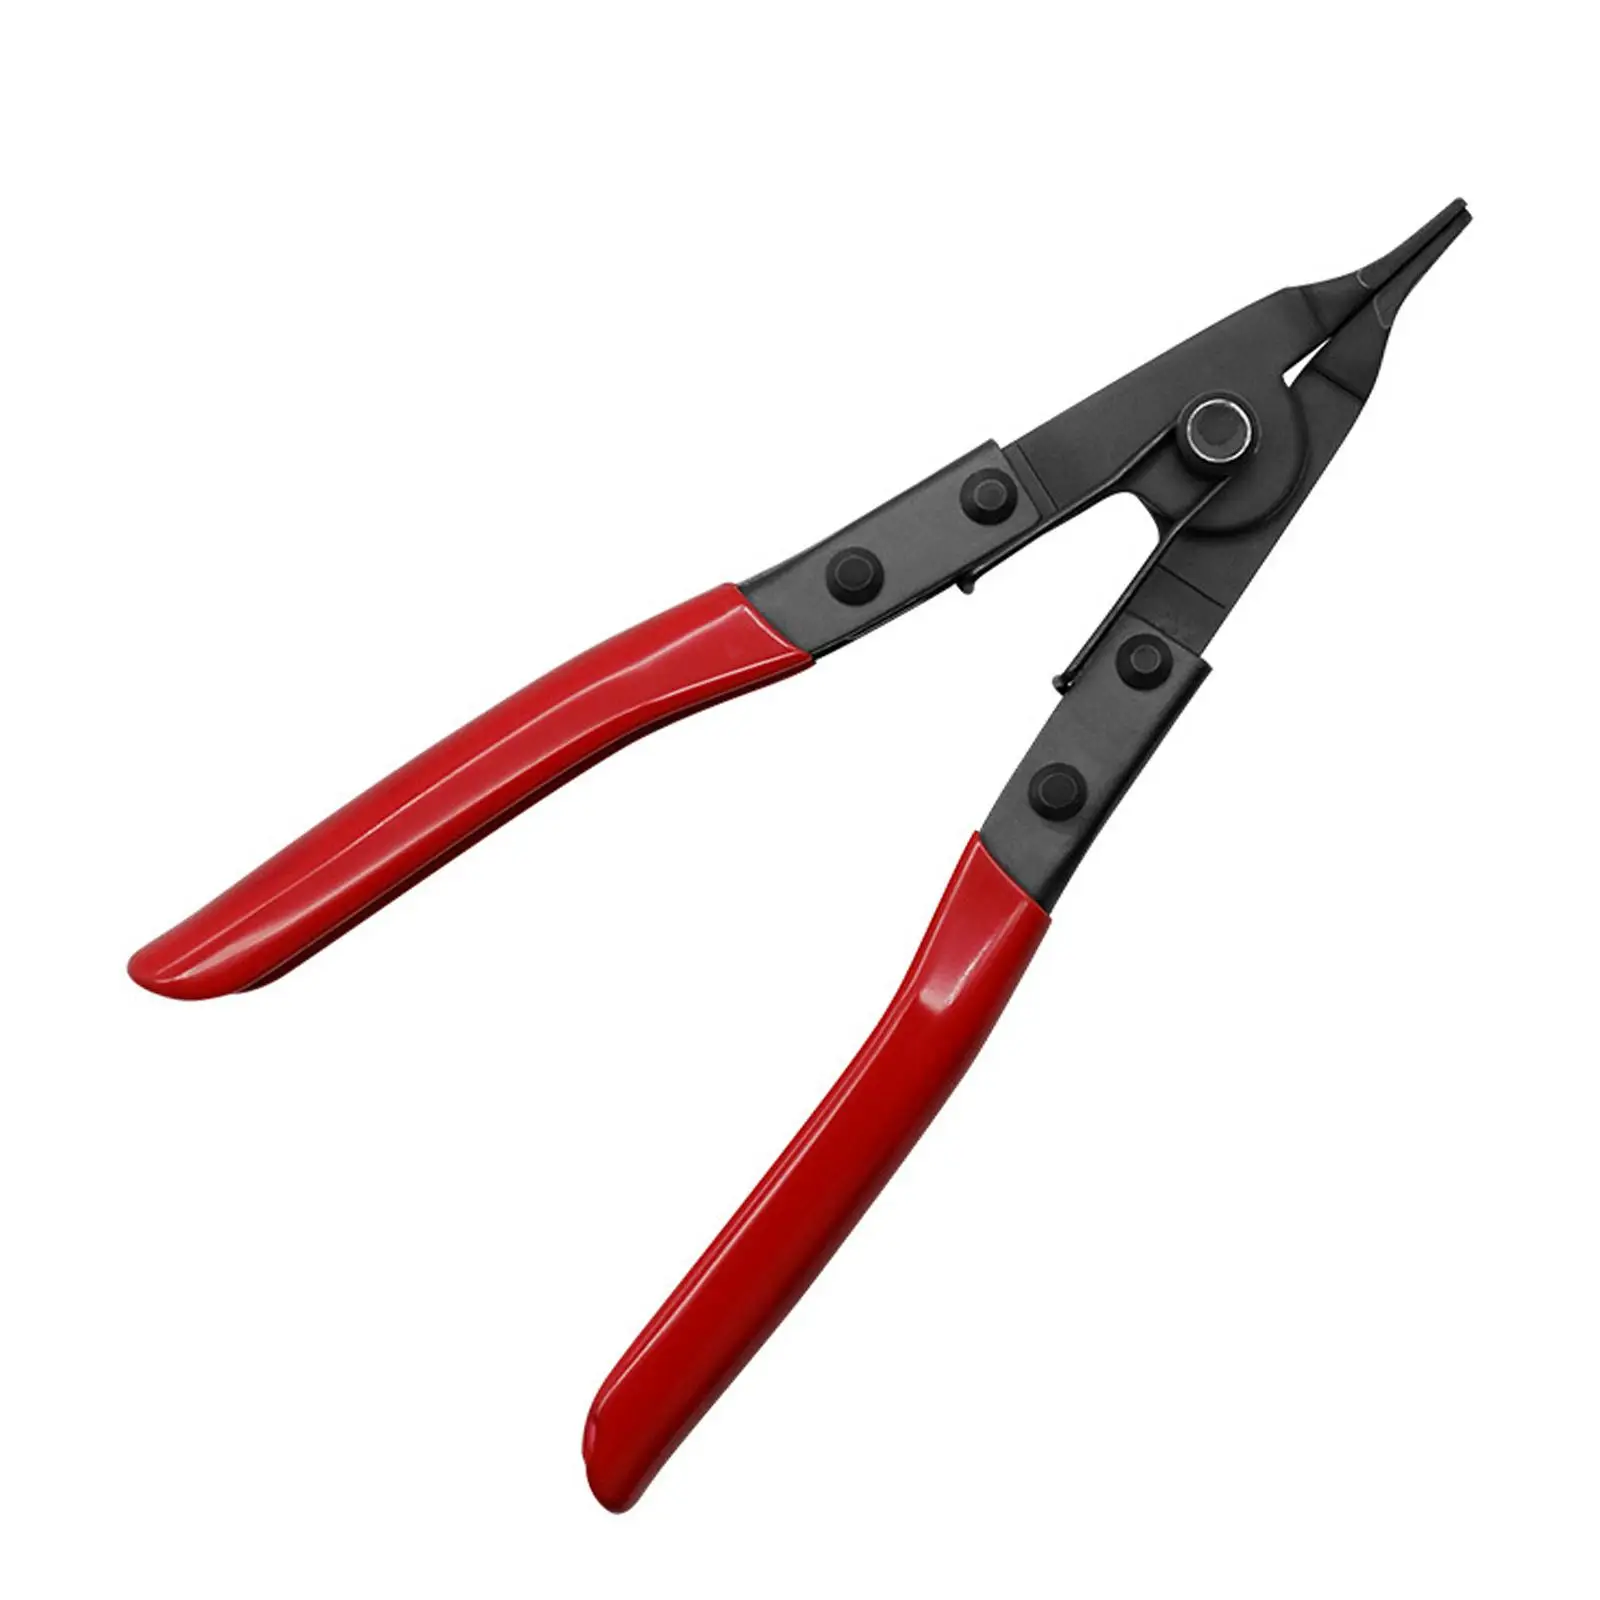 Angle Tip Lock Ring Pliers for Transmission Transfer Cases Retaining Ring Pliers Special Circlip Pliers Flat Snap Ring Pliers